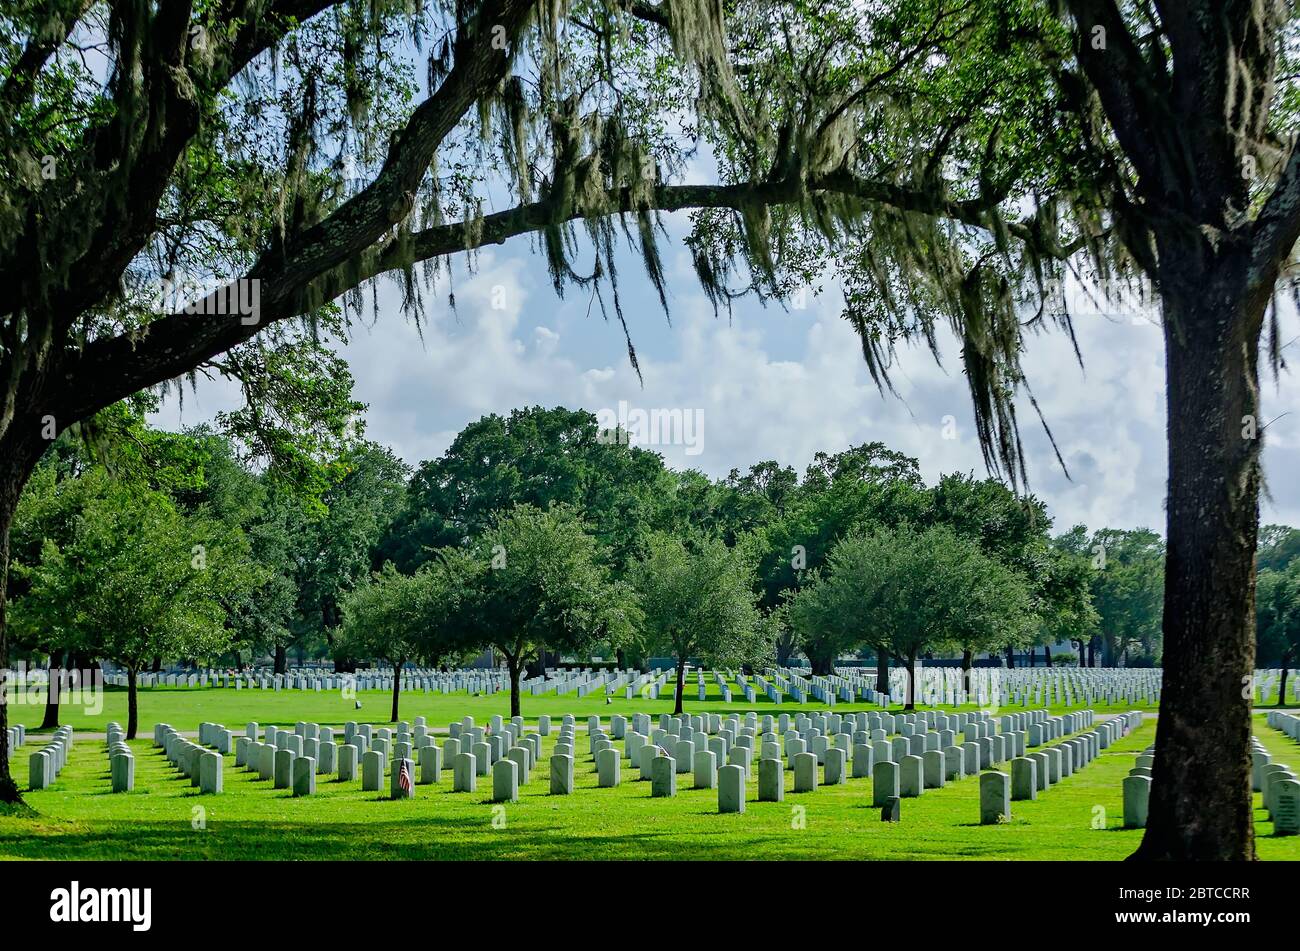 Veterans’ graves stand unadorned for Memorial Day in Biloxi National Cemetery, May 23, 2020, in Biloxi, Mississippi. Stock Photo